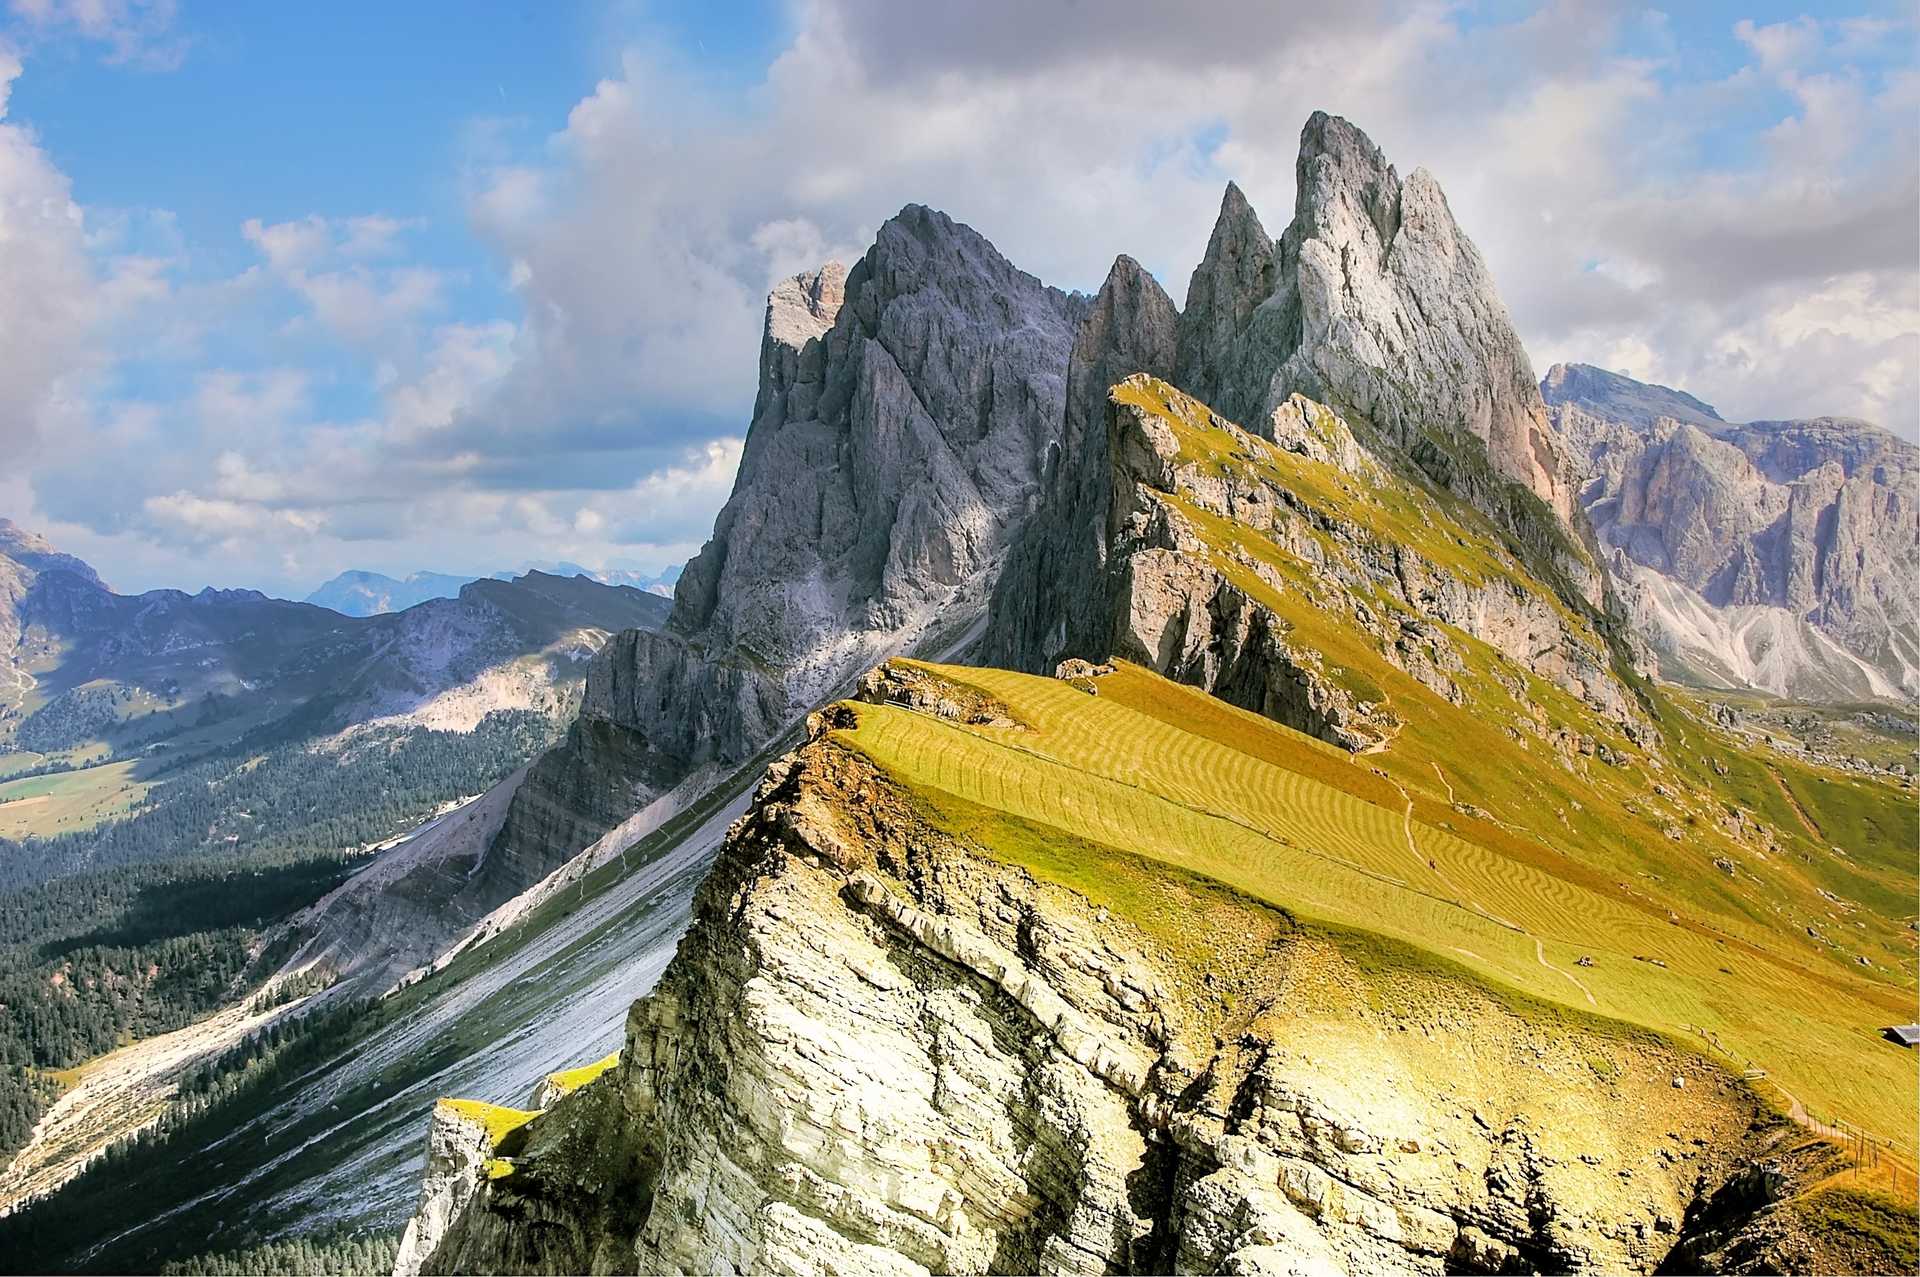 Massive mountains of the Dolomites